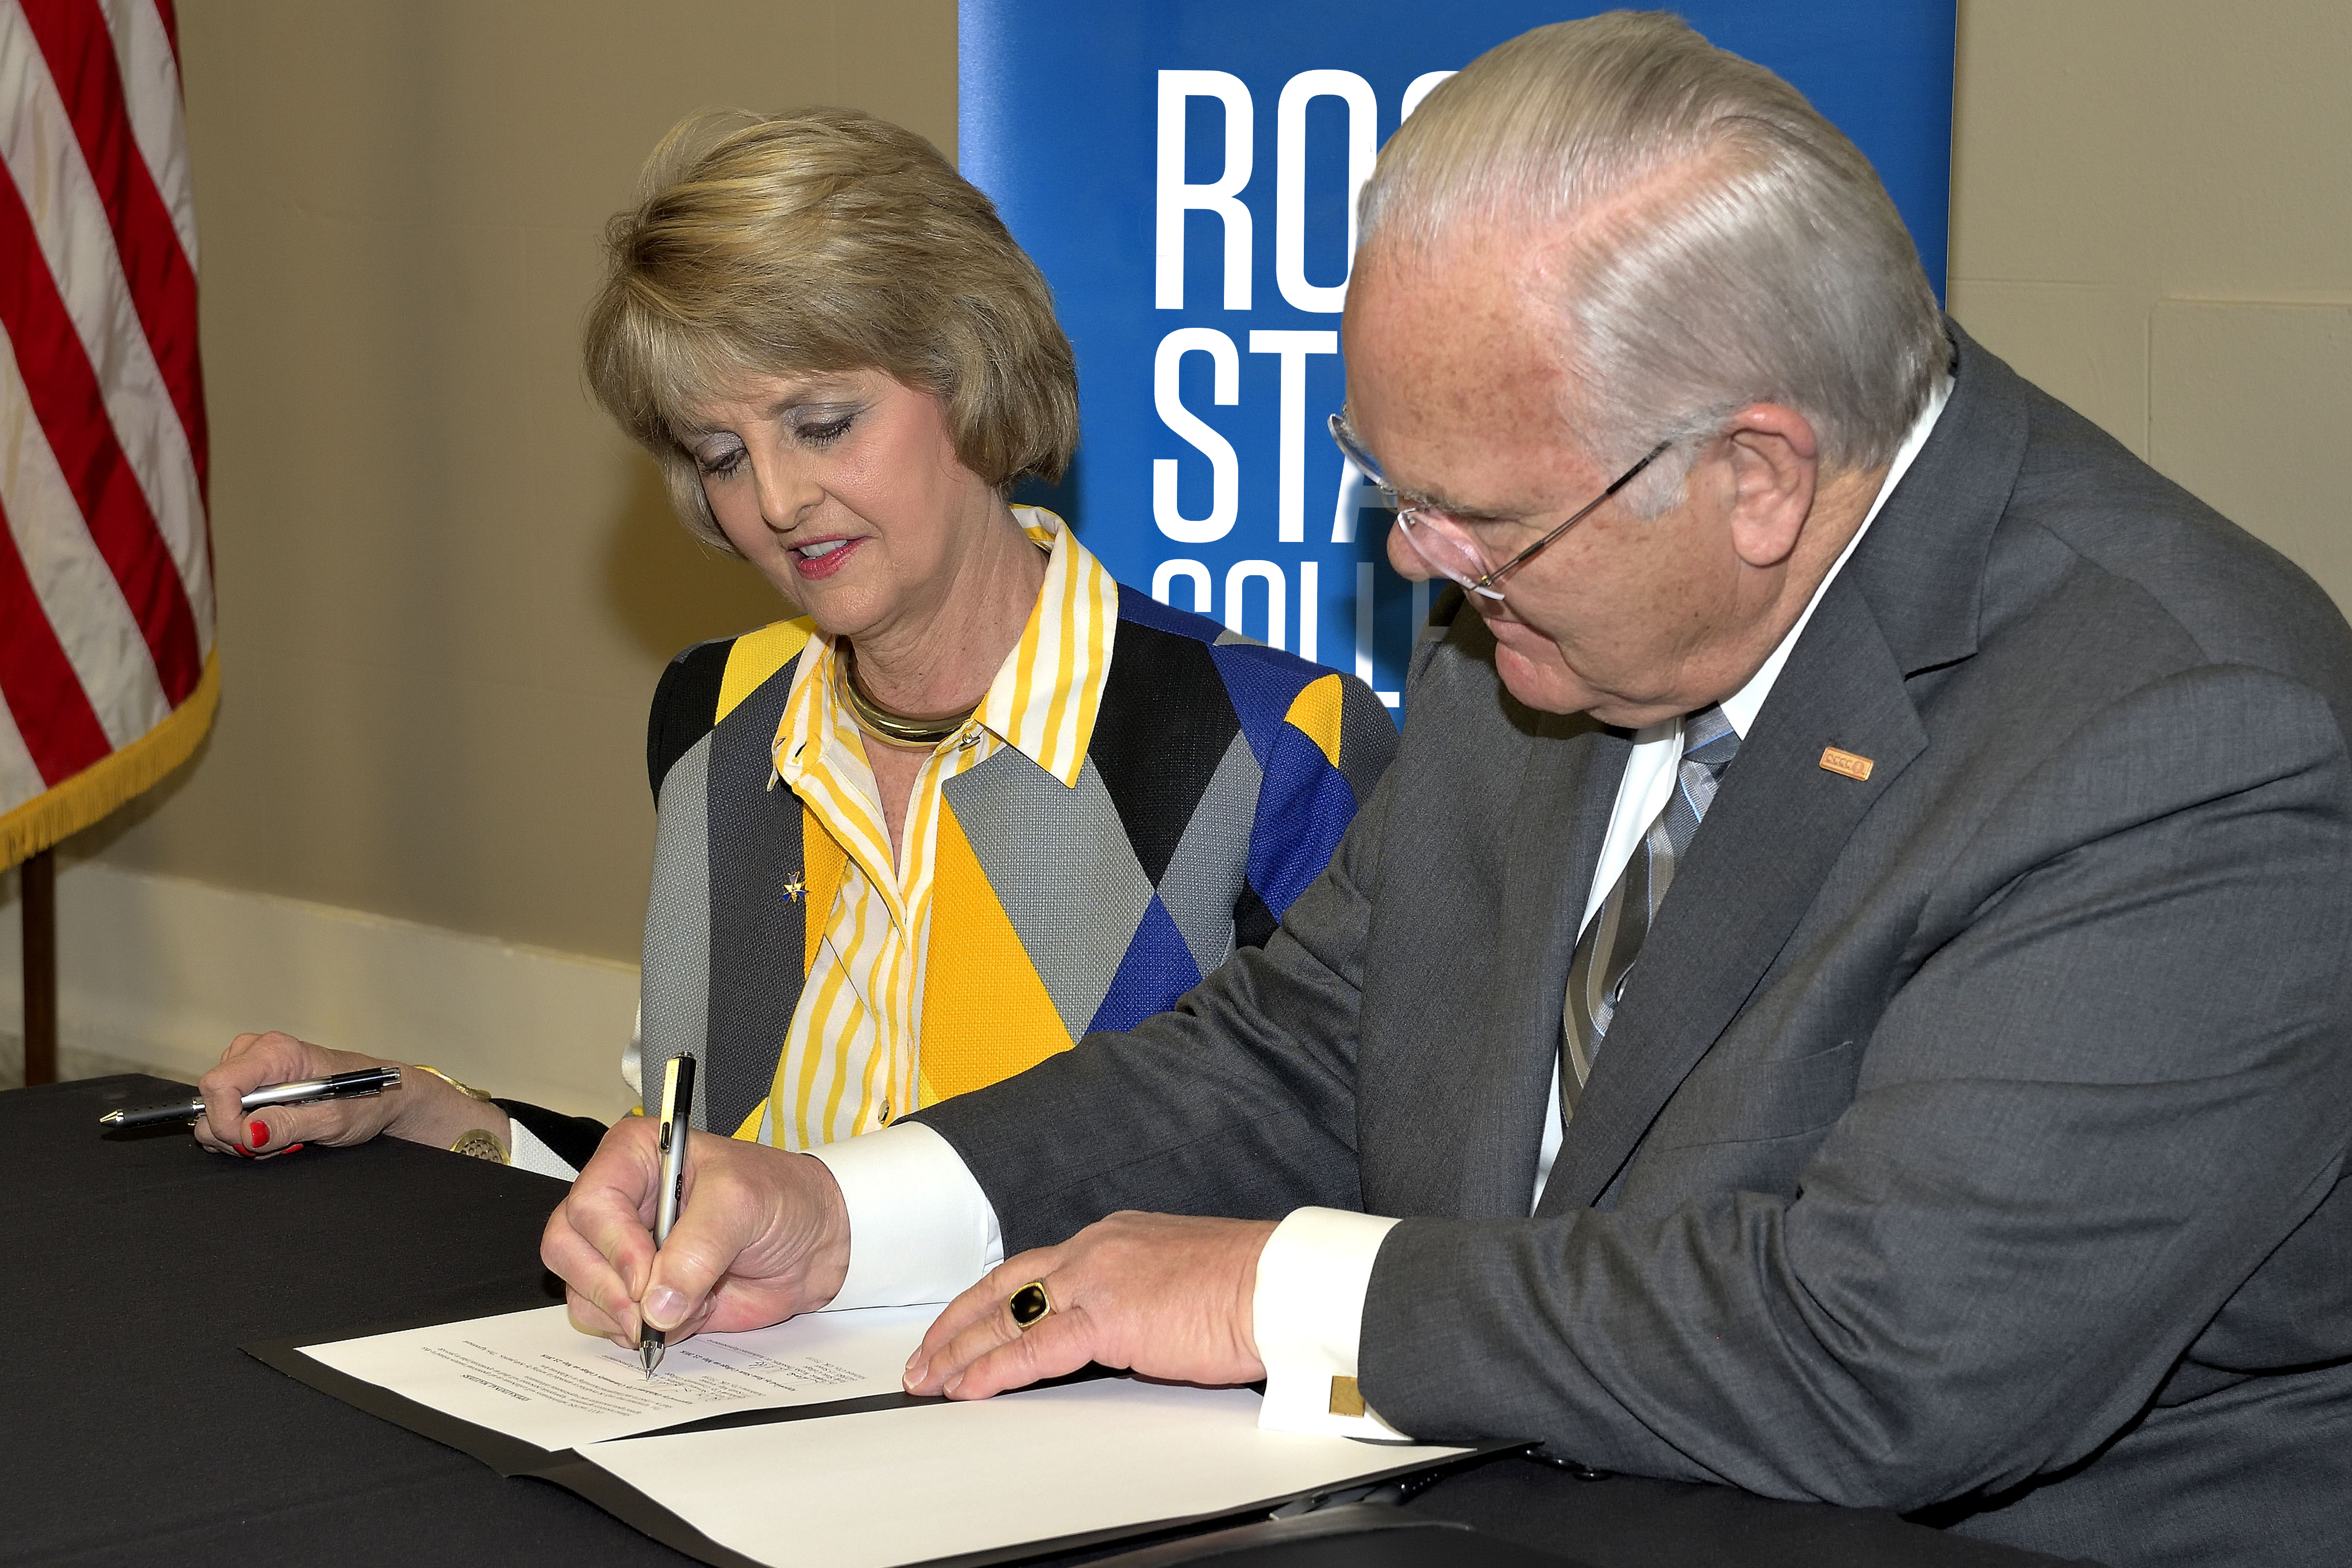 Rose State College President Jeanie Webb and Oklahoma City Community College President Jerry Steward sign the agreement for the colleges to partner on bidding for services.